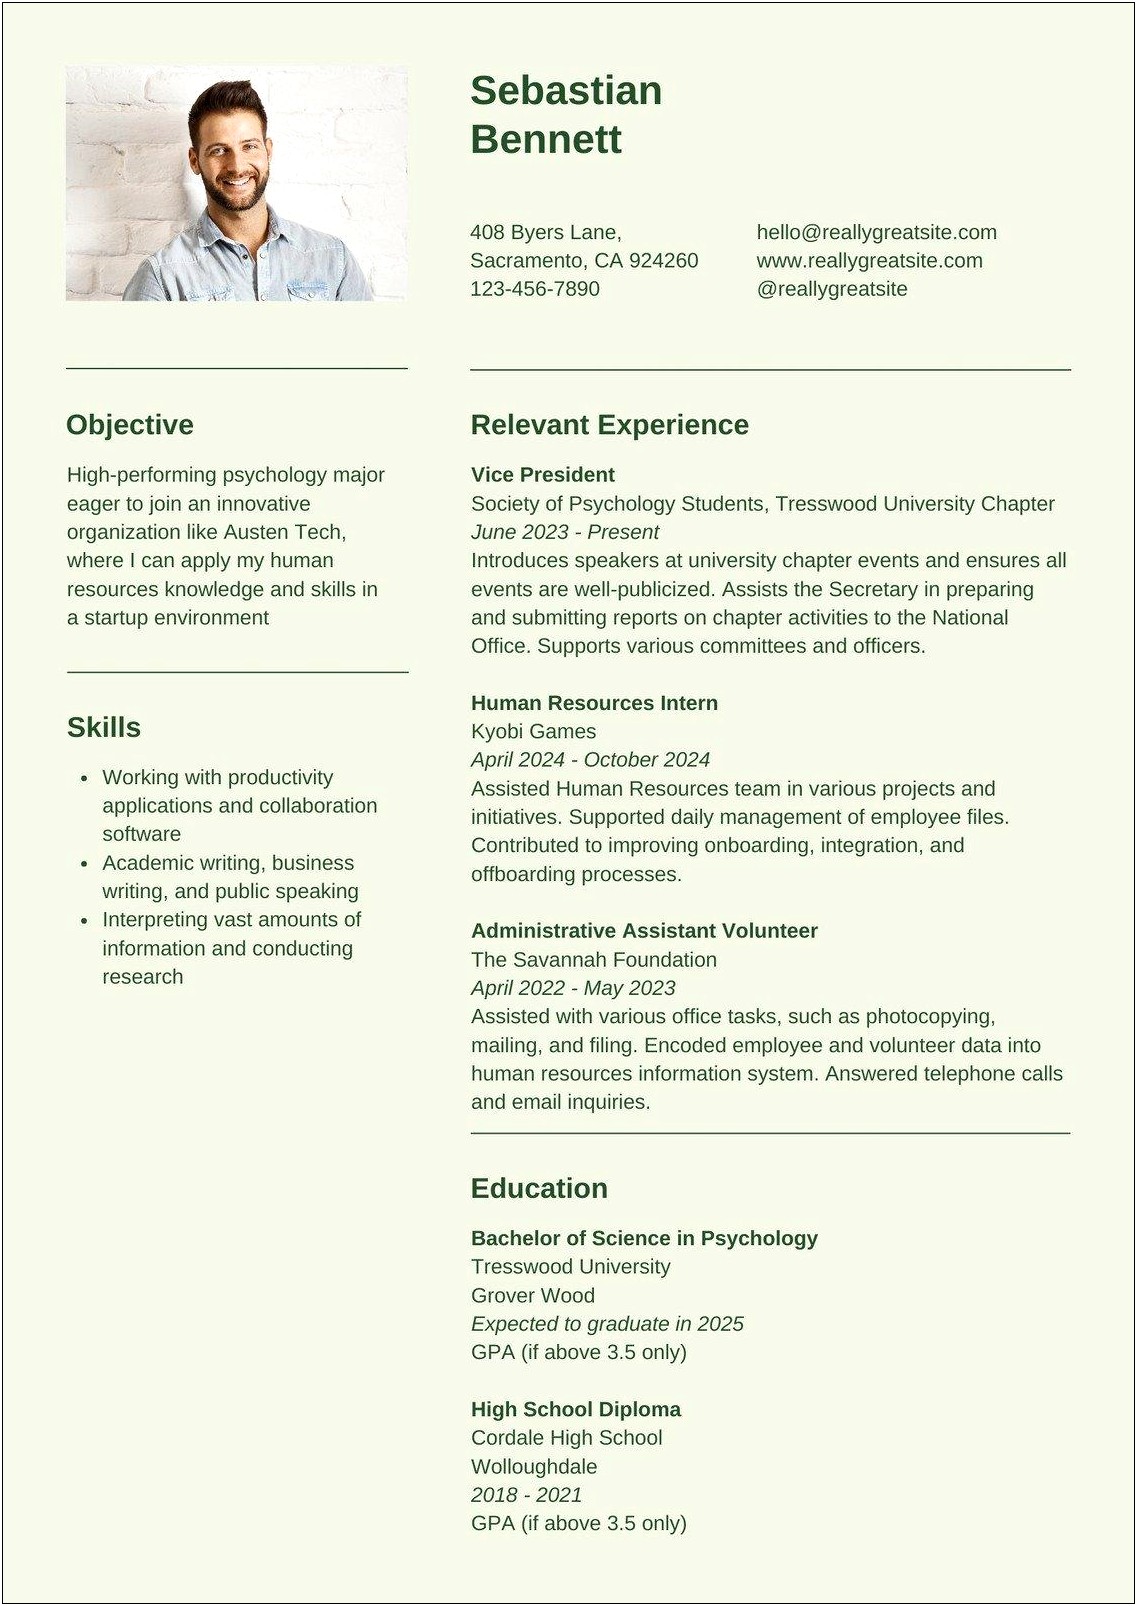 Resume Template For College Student Applying For Internship